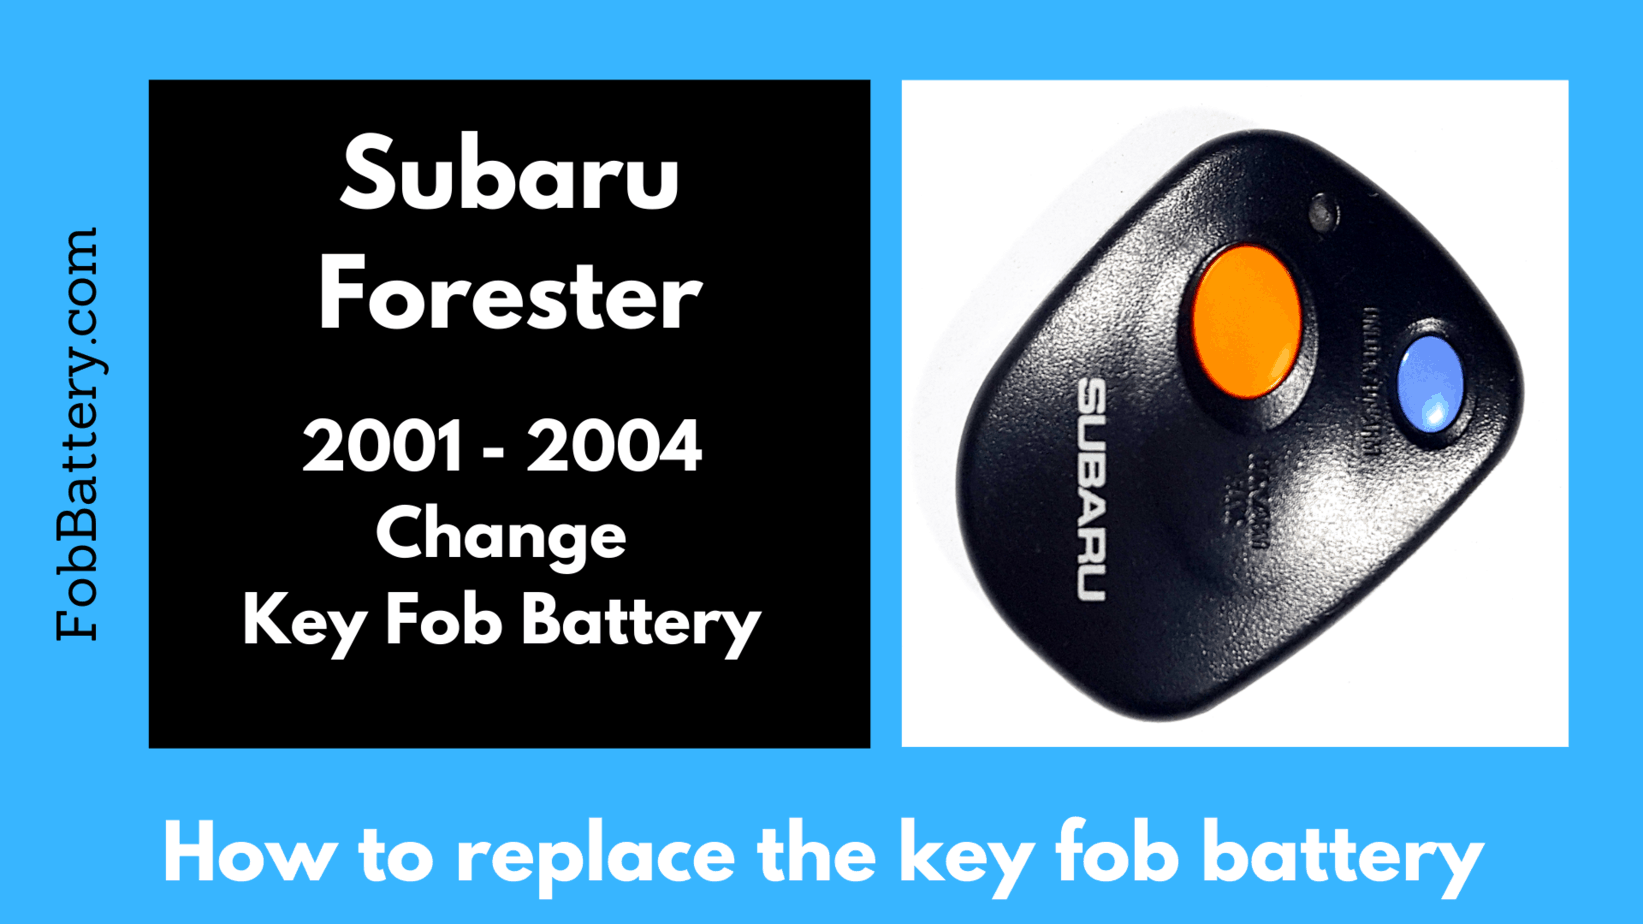 Subaru Forester key fob battery replacement